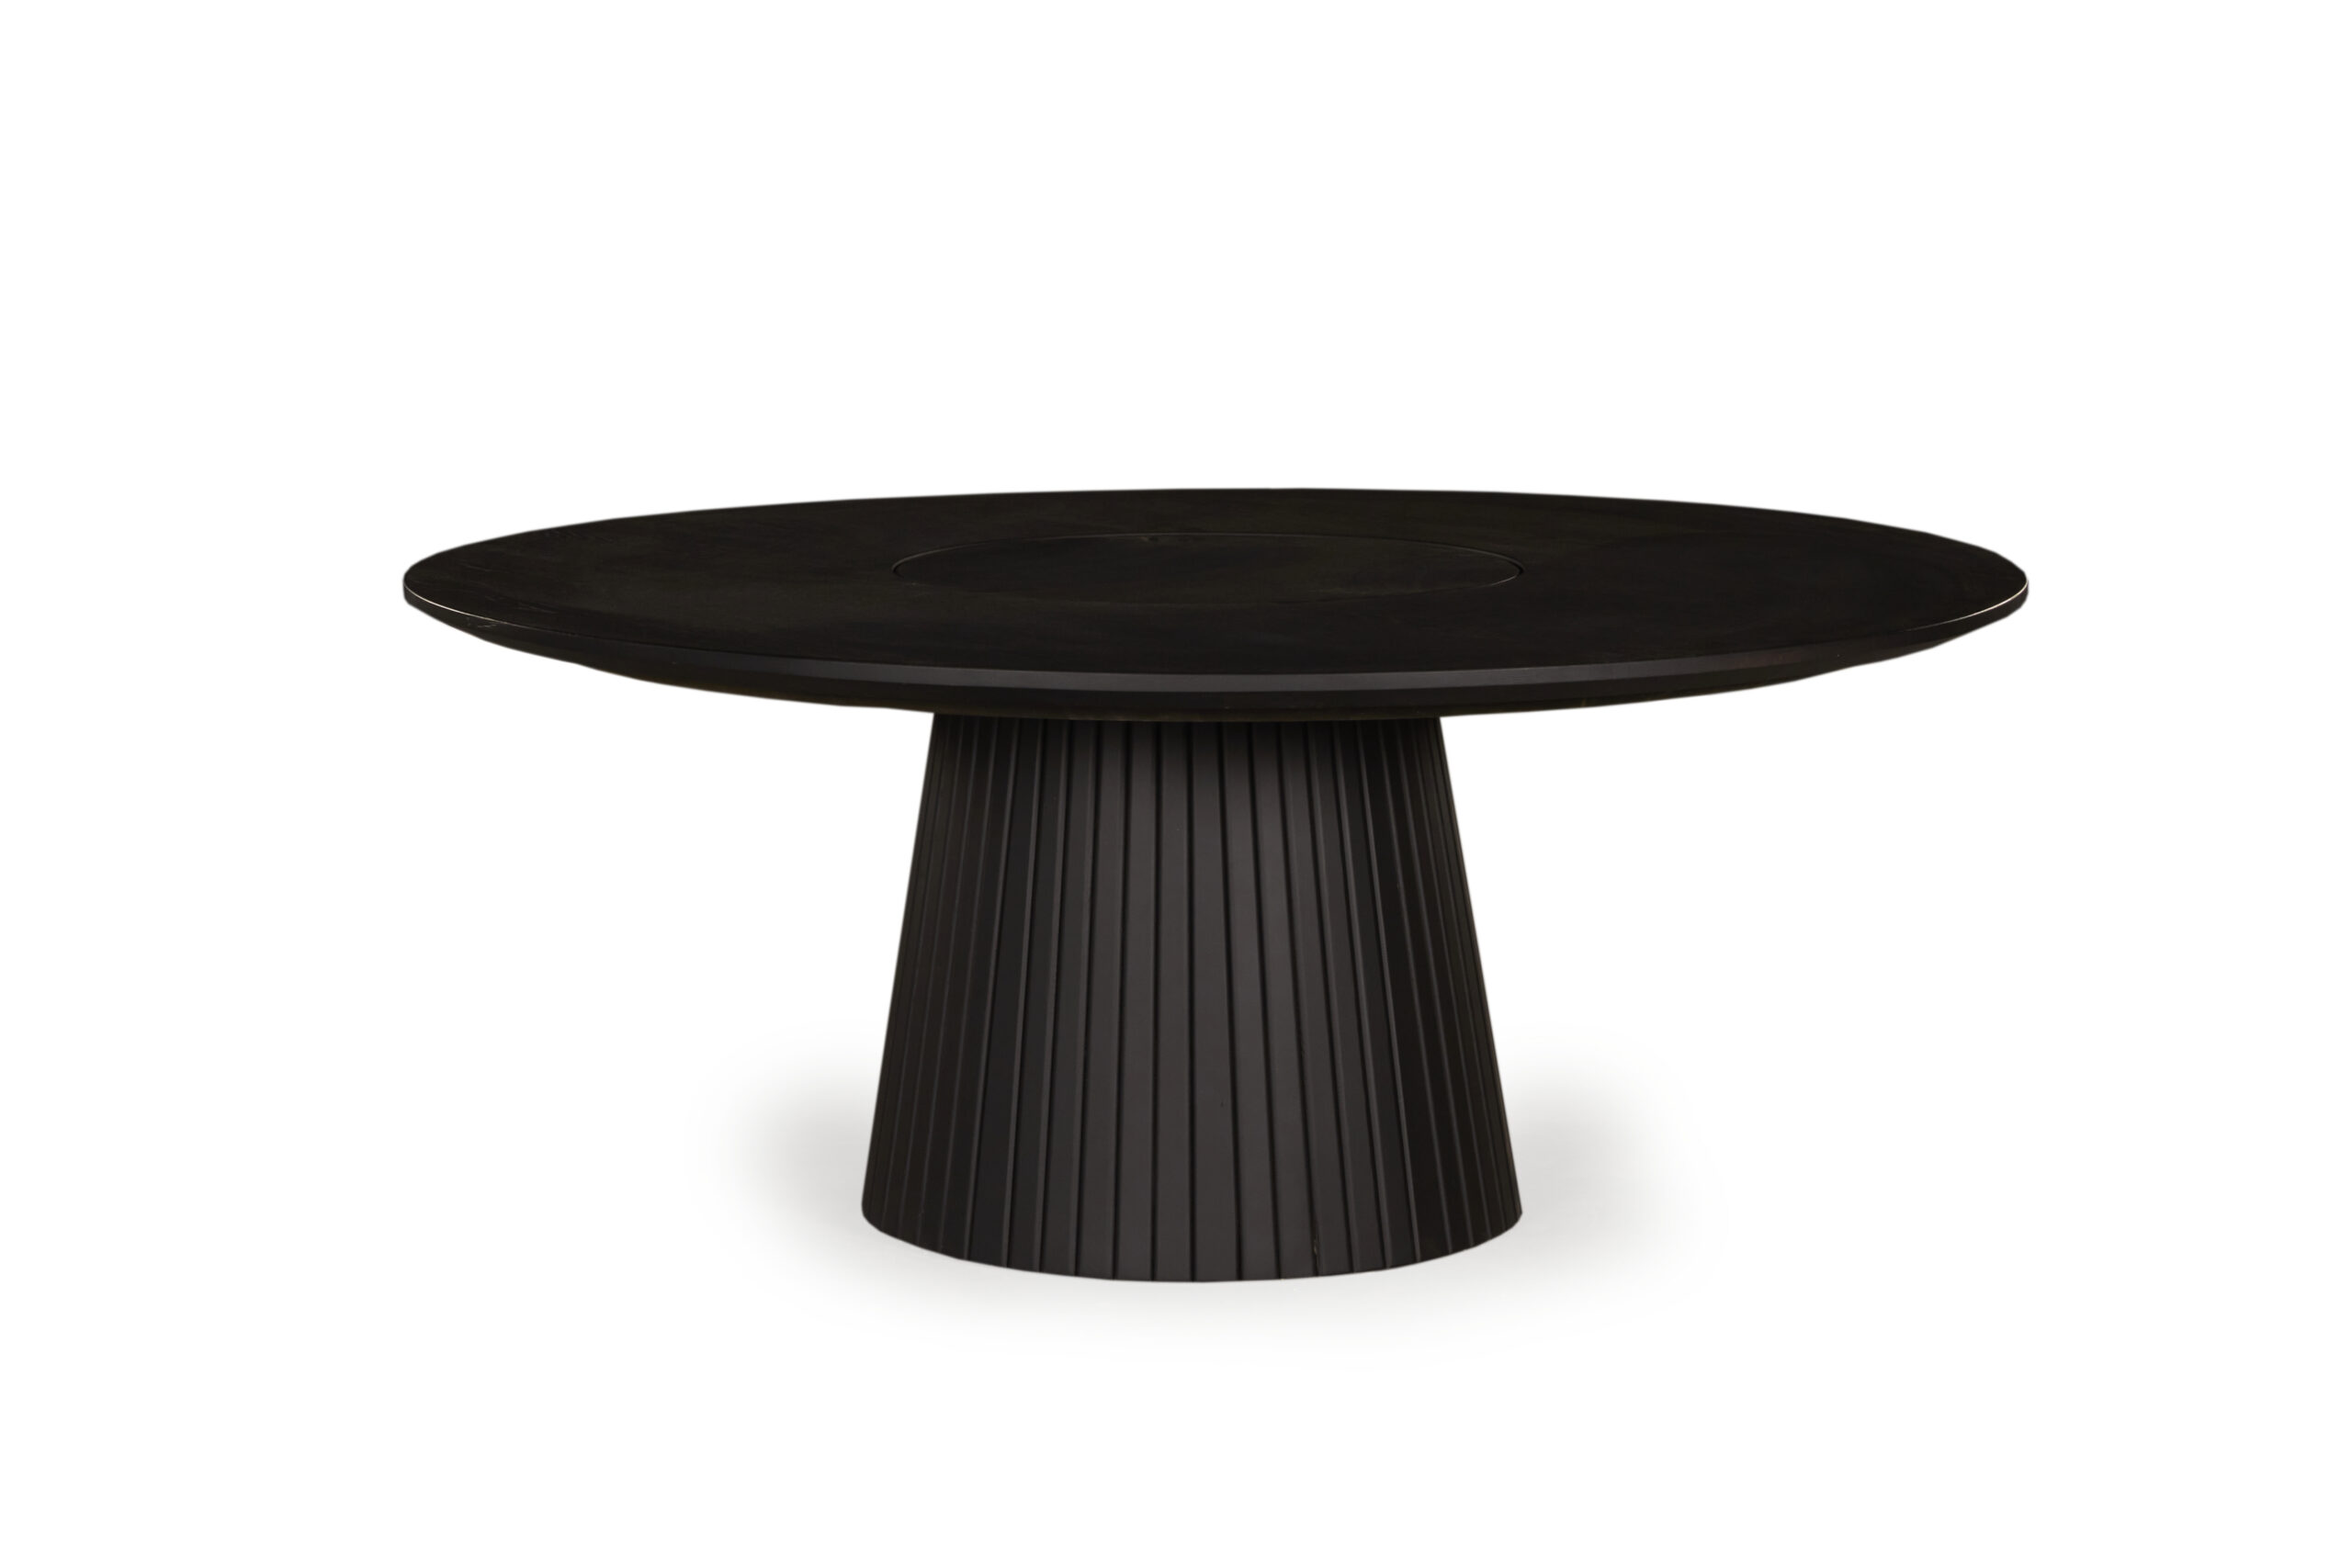 Surry Hills Round Dining Table featuring brushed black American Oak construction, 1800mm diameter, undercut bevel edge, and built-in lazy Susan. Supported by a flat ribbed base.